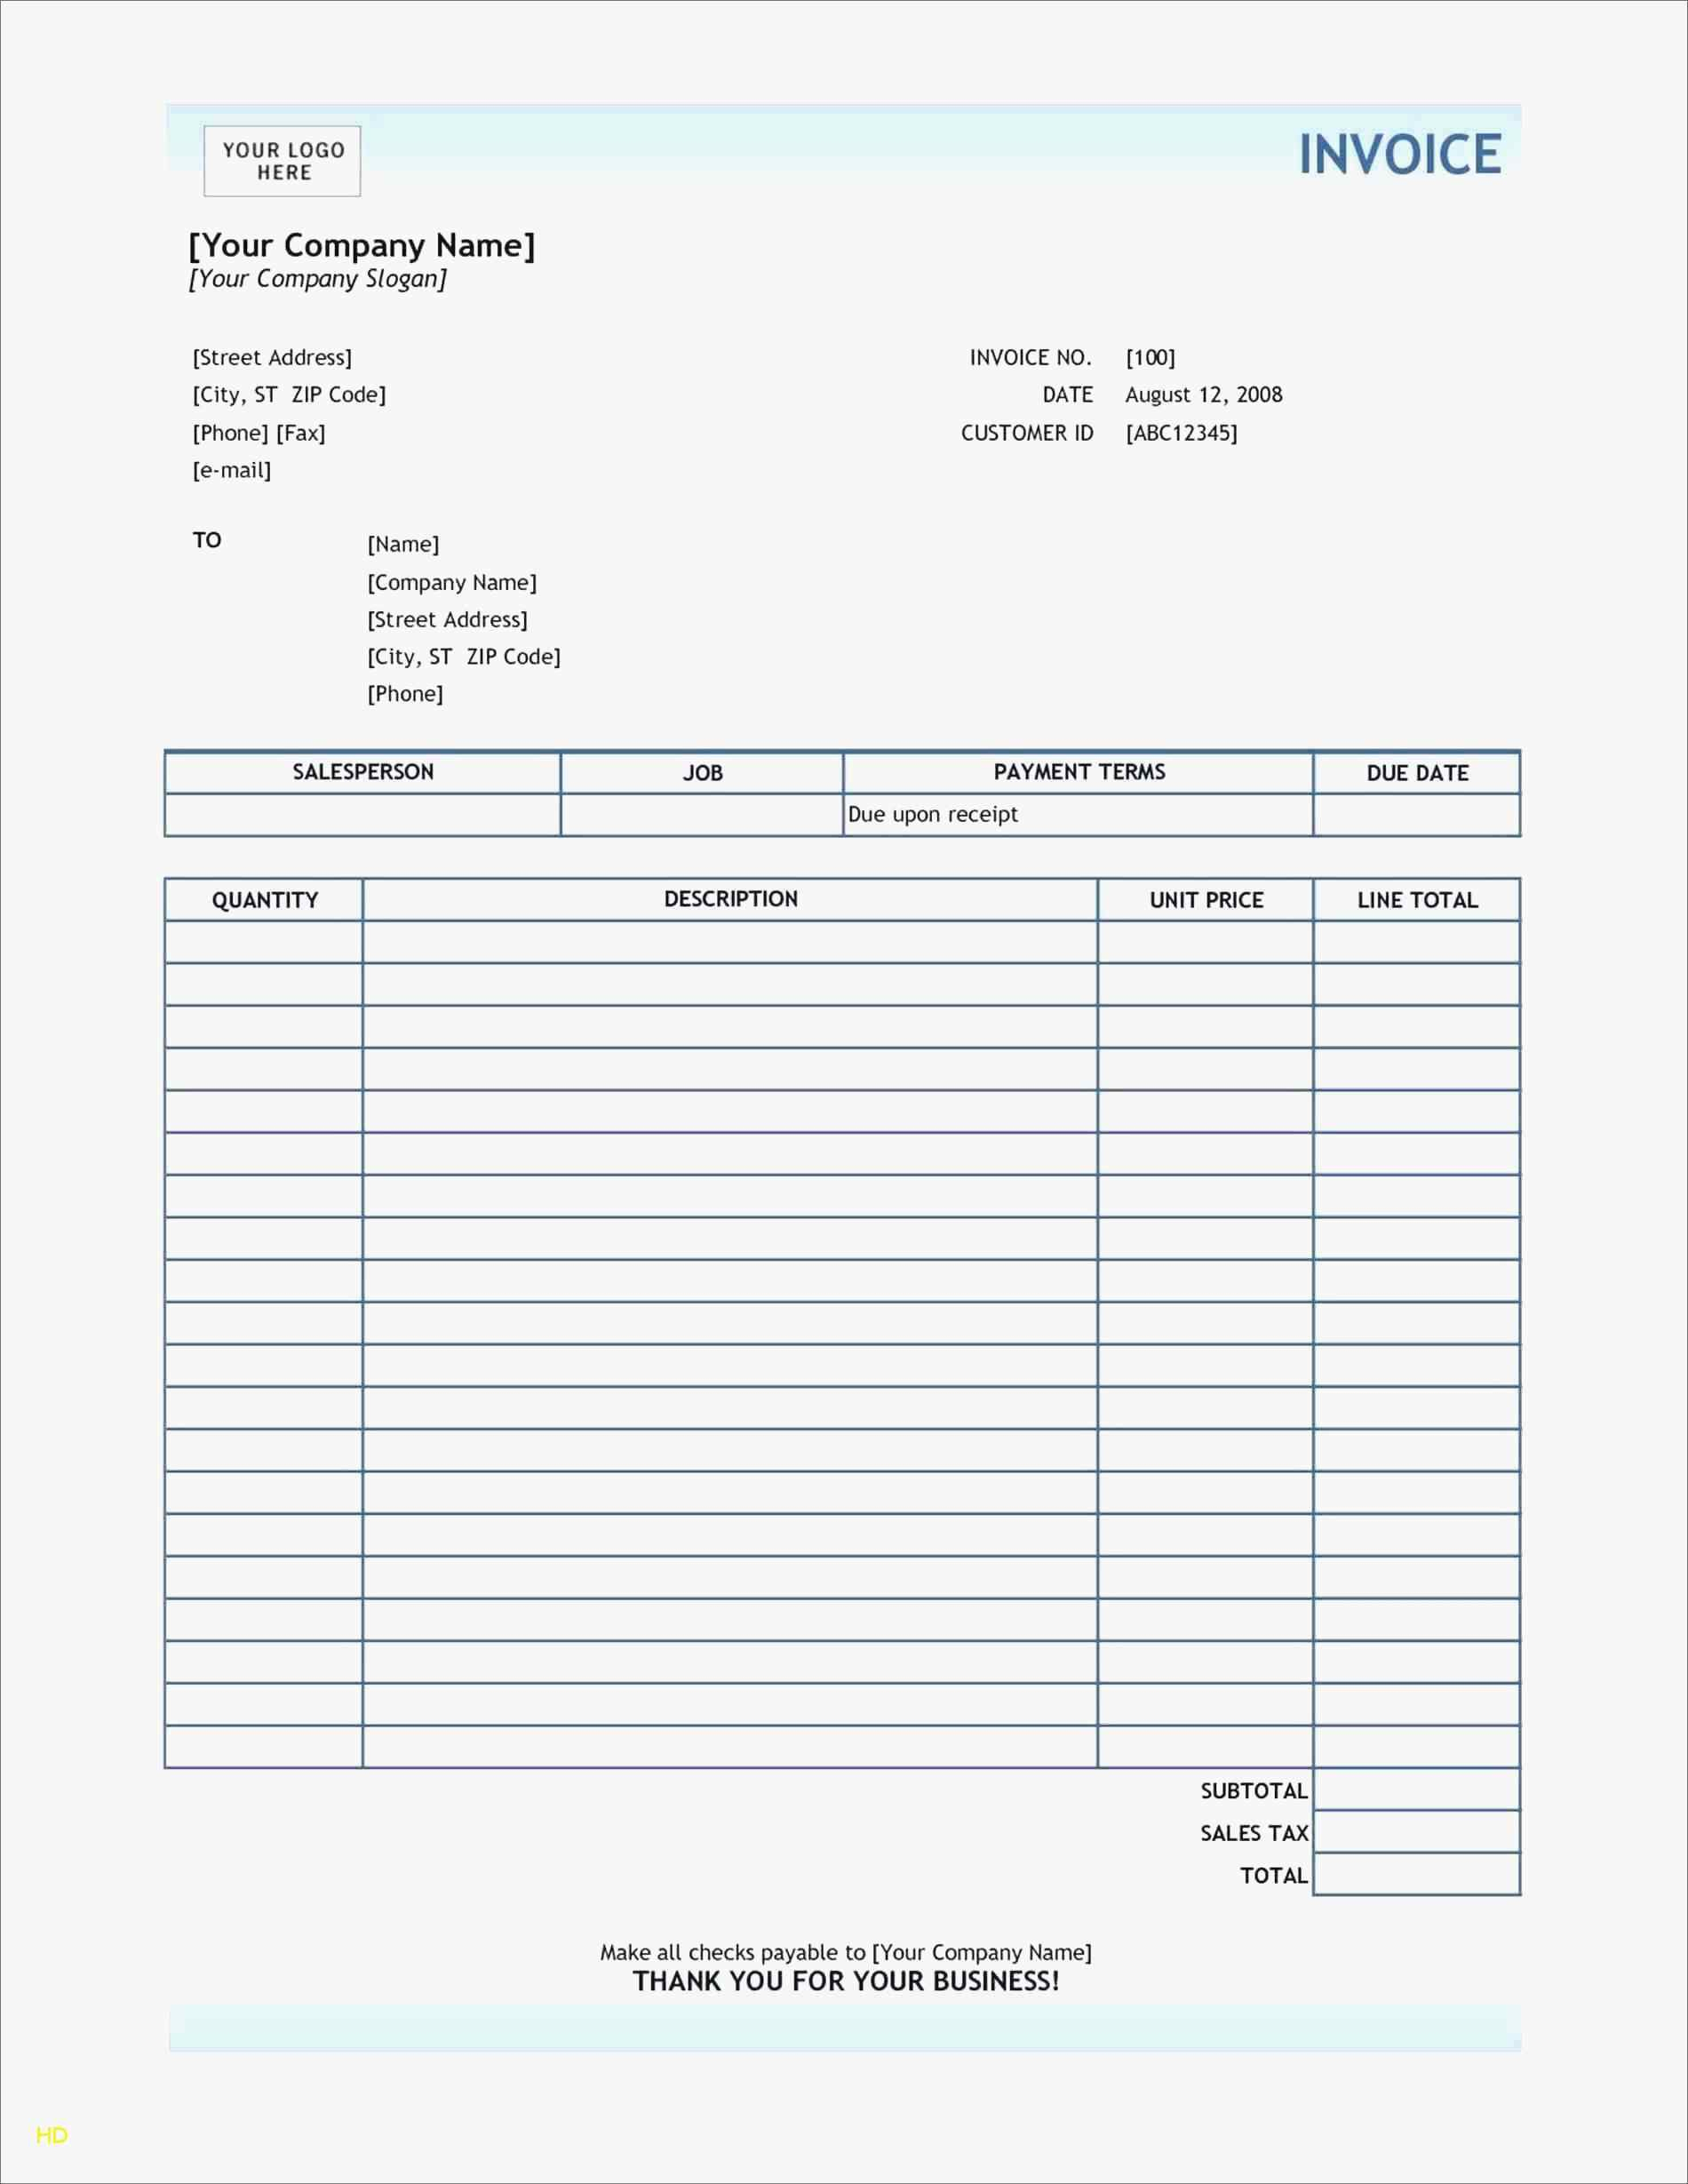 Free Trucking Invoice Template PDF WORD EXCEL Data Spreadsheet